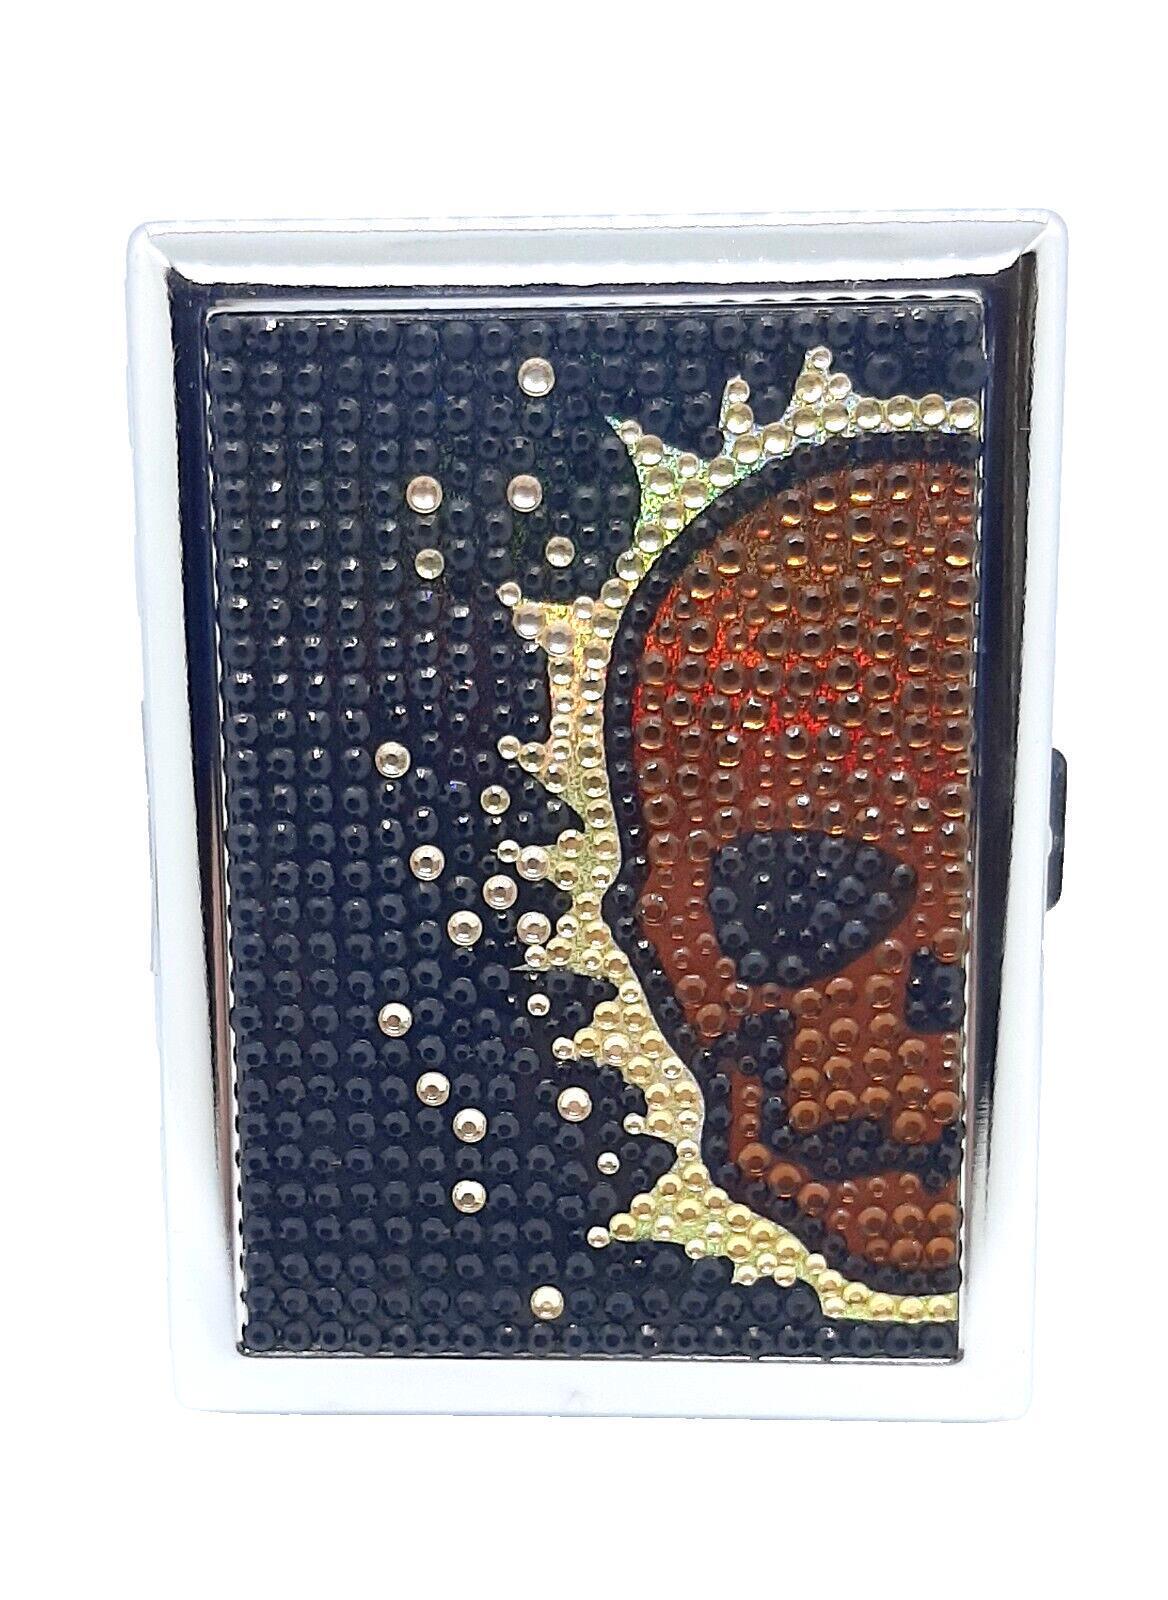 RYO Metal Brown Skull Handcrafted Stones 100s Size Cigarette Case